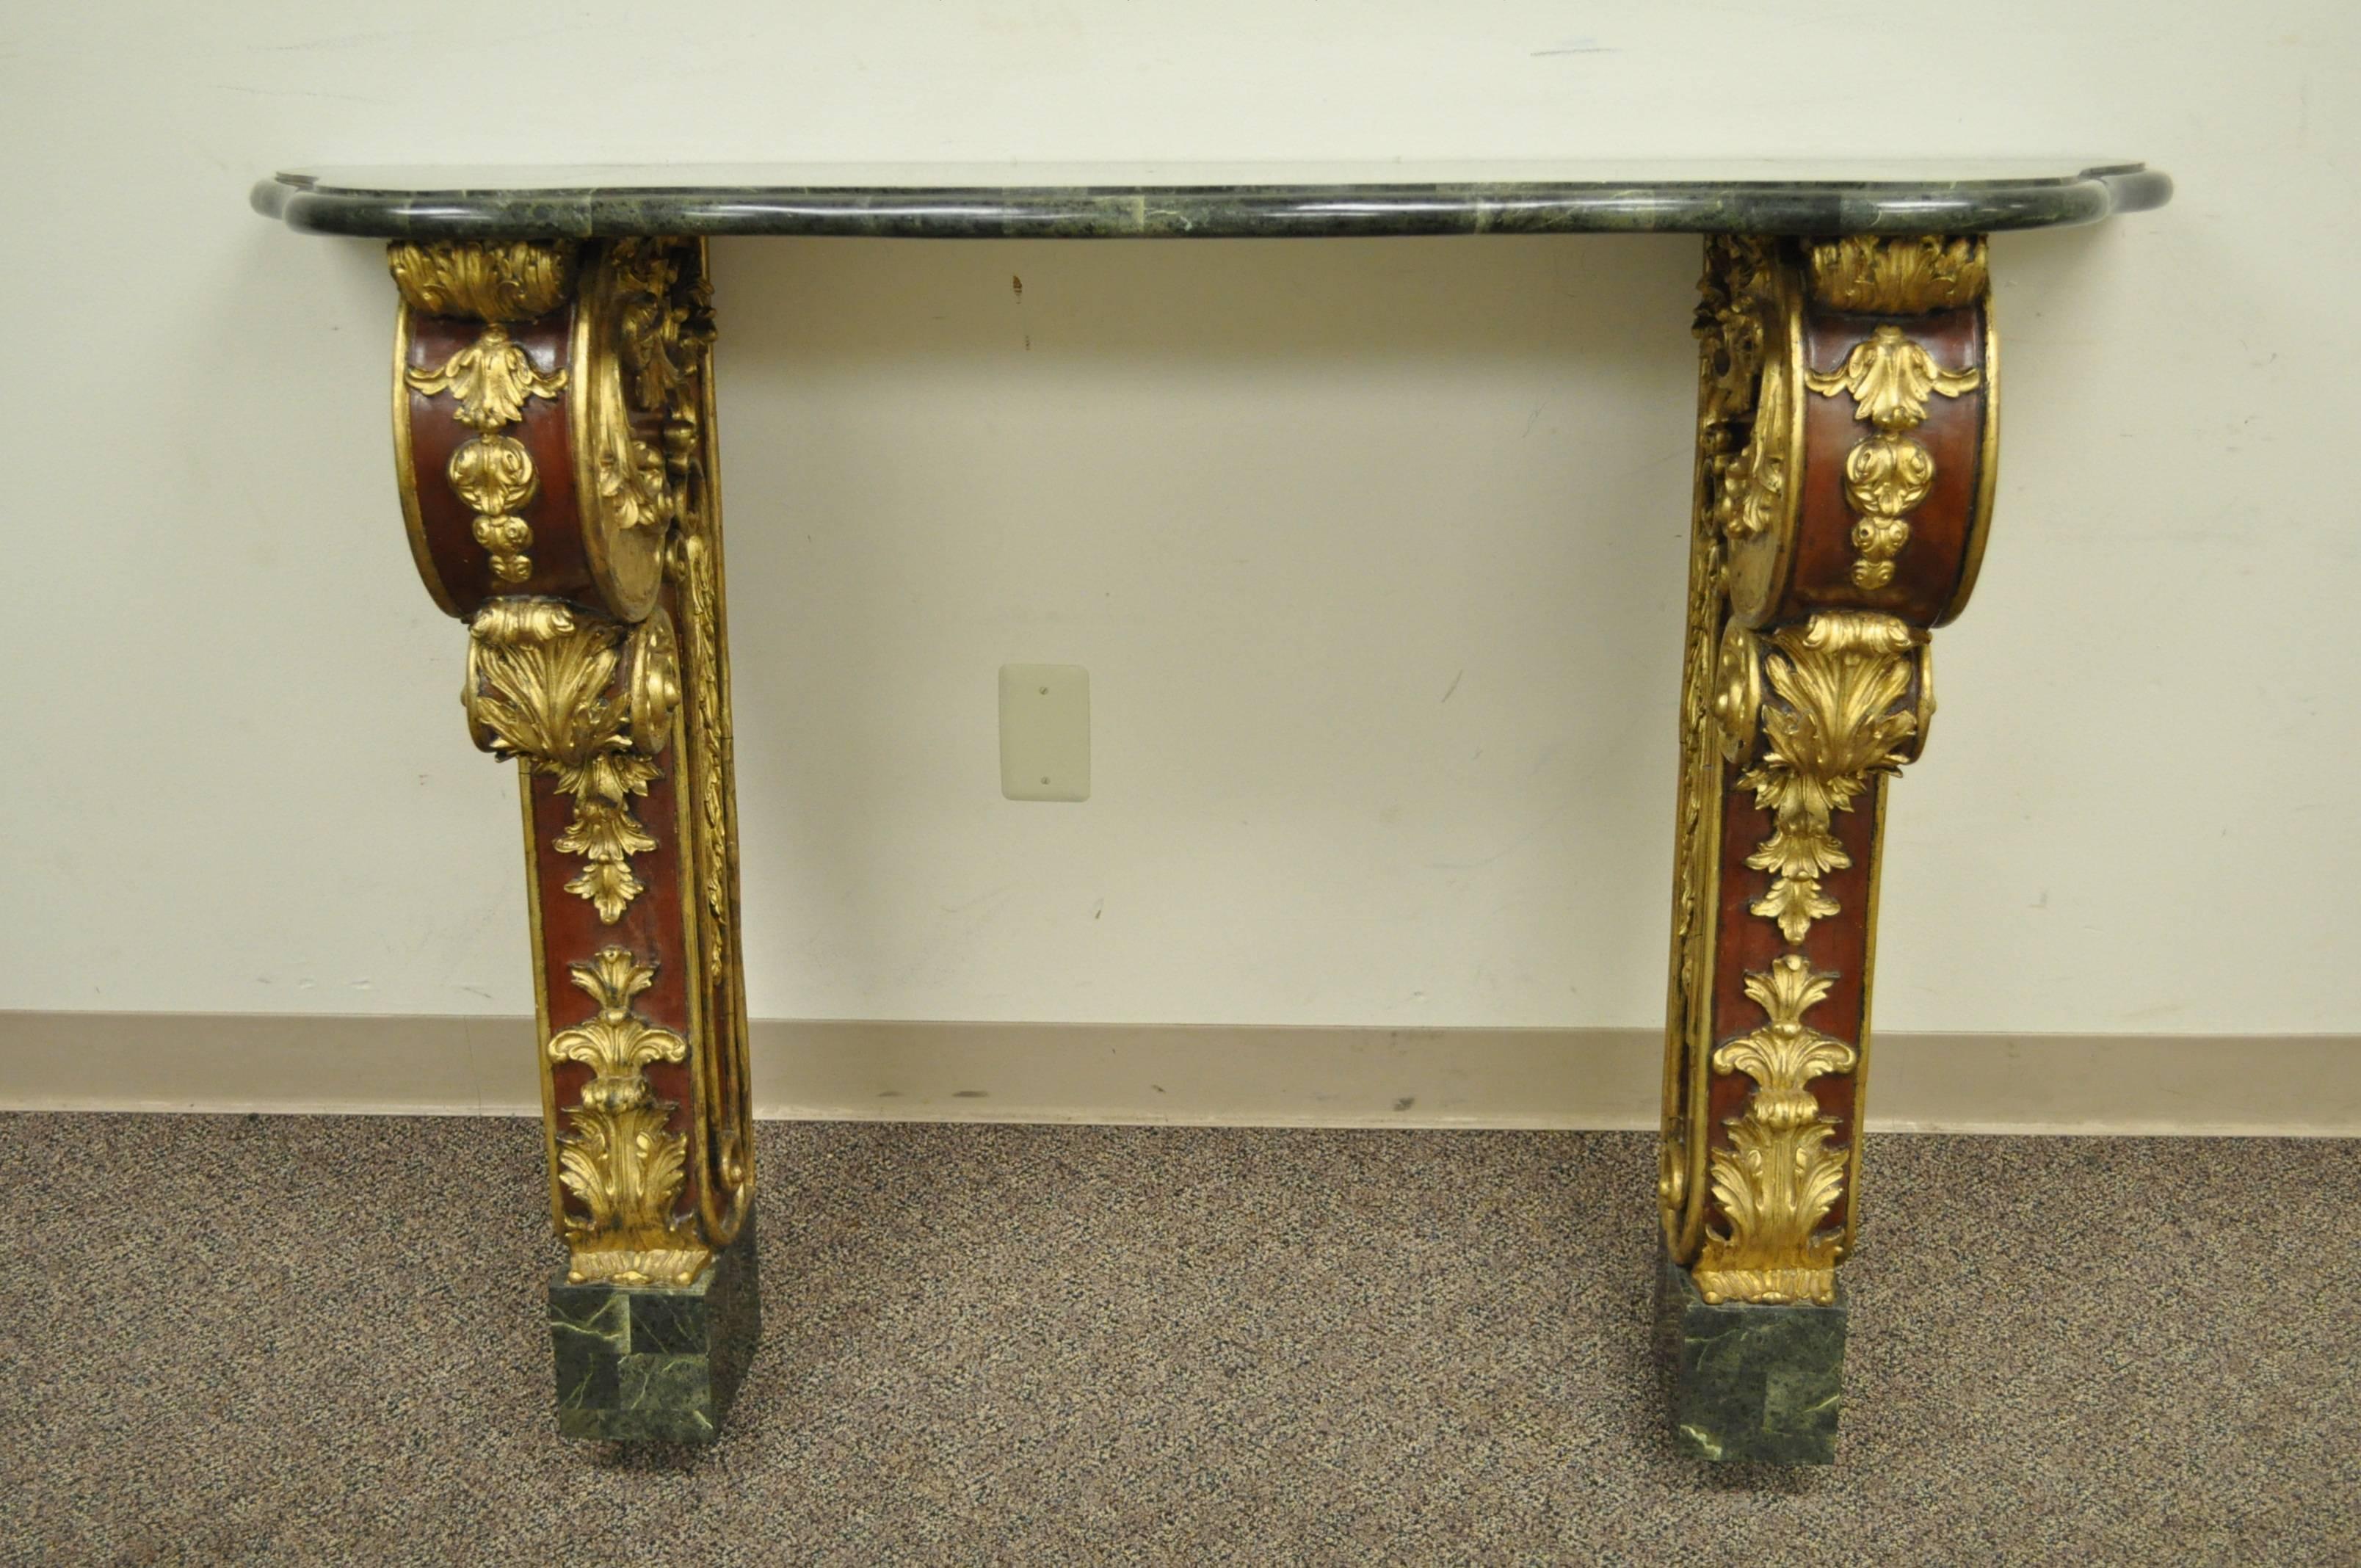 A beautiful 20th century French Rococo or Louis XV style wall-mounted console or hall table. Item features a mahogany frame, extravagant giltwood accents, and tessellated stone top and feet. The table has a wonderful contrast between the brilliant